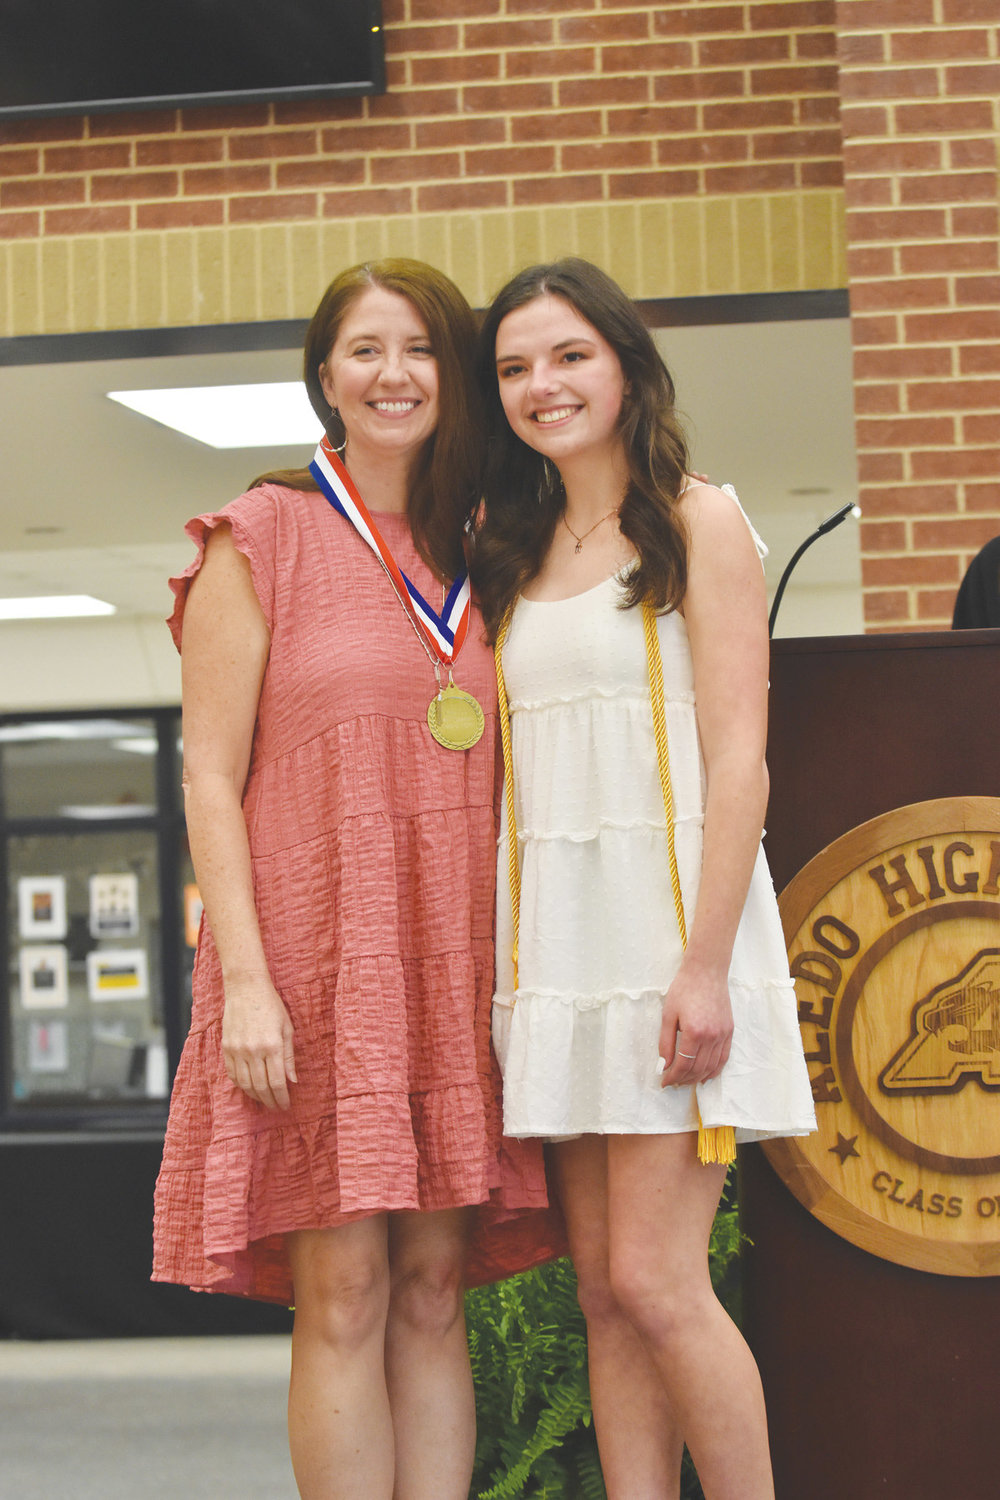 Faith Rudzinski is the daughter of Kris and Dawn Rudzinski. Faith plans to attend Texas A&M University, major in biomedical sciences, and pursue a career in pediatric emergency medicine. she honored Mrs. Jenni Meador.